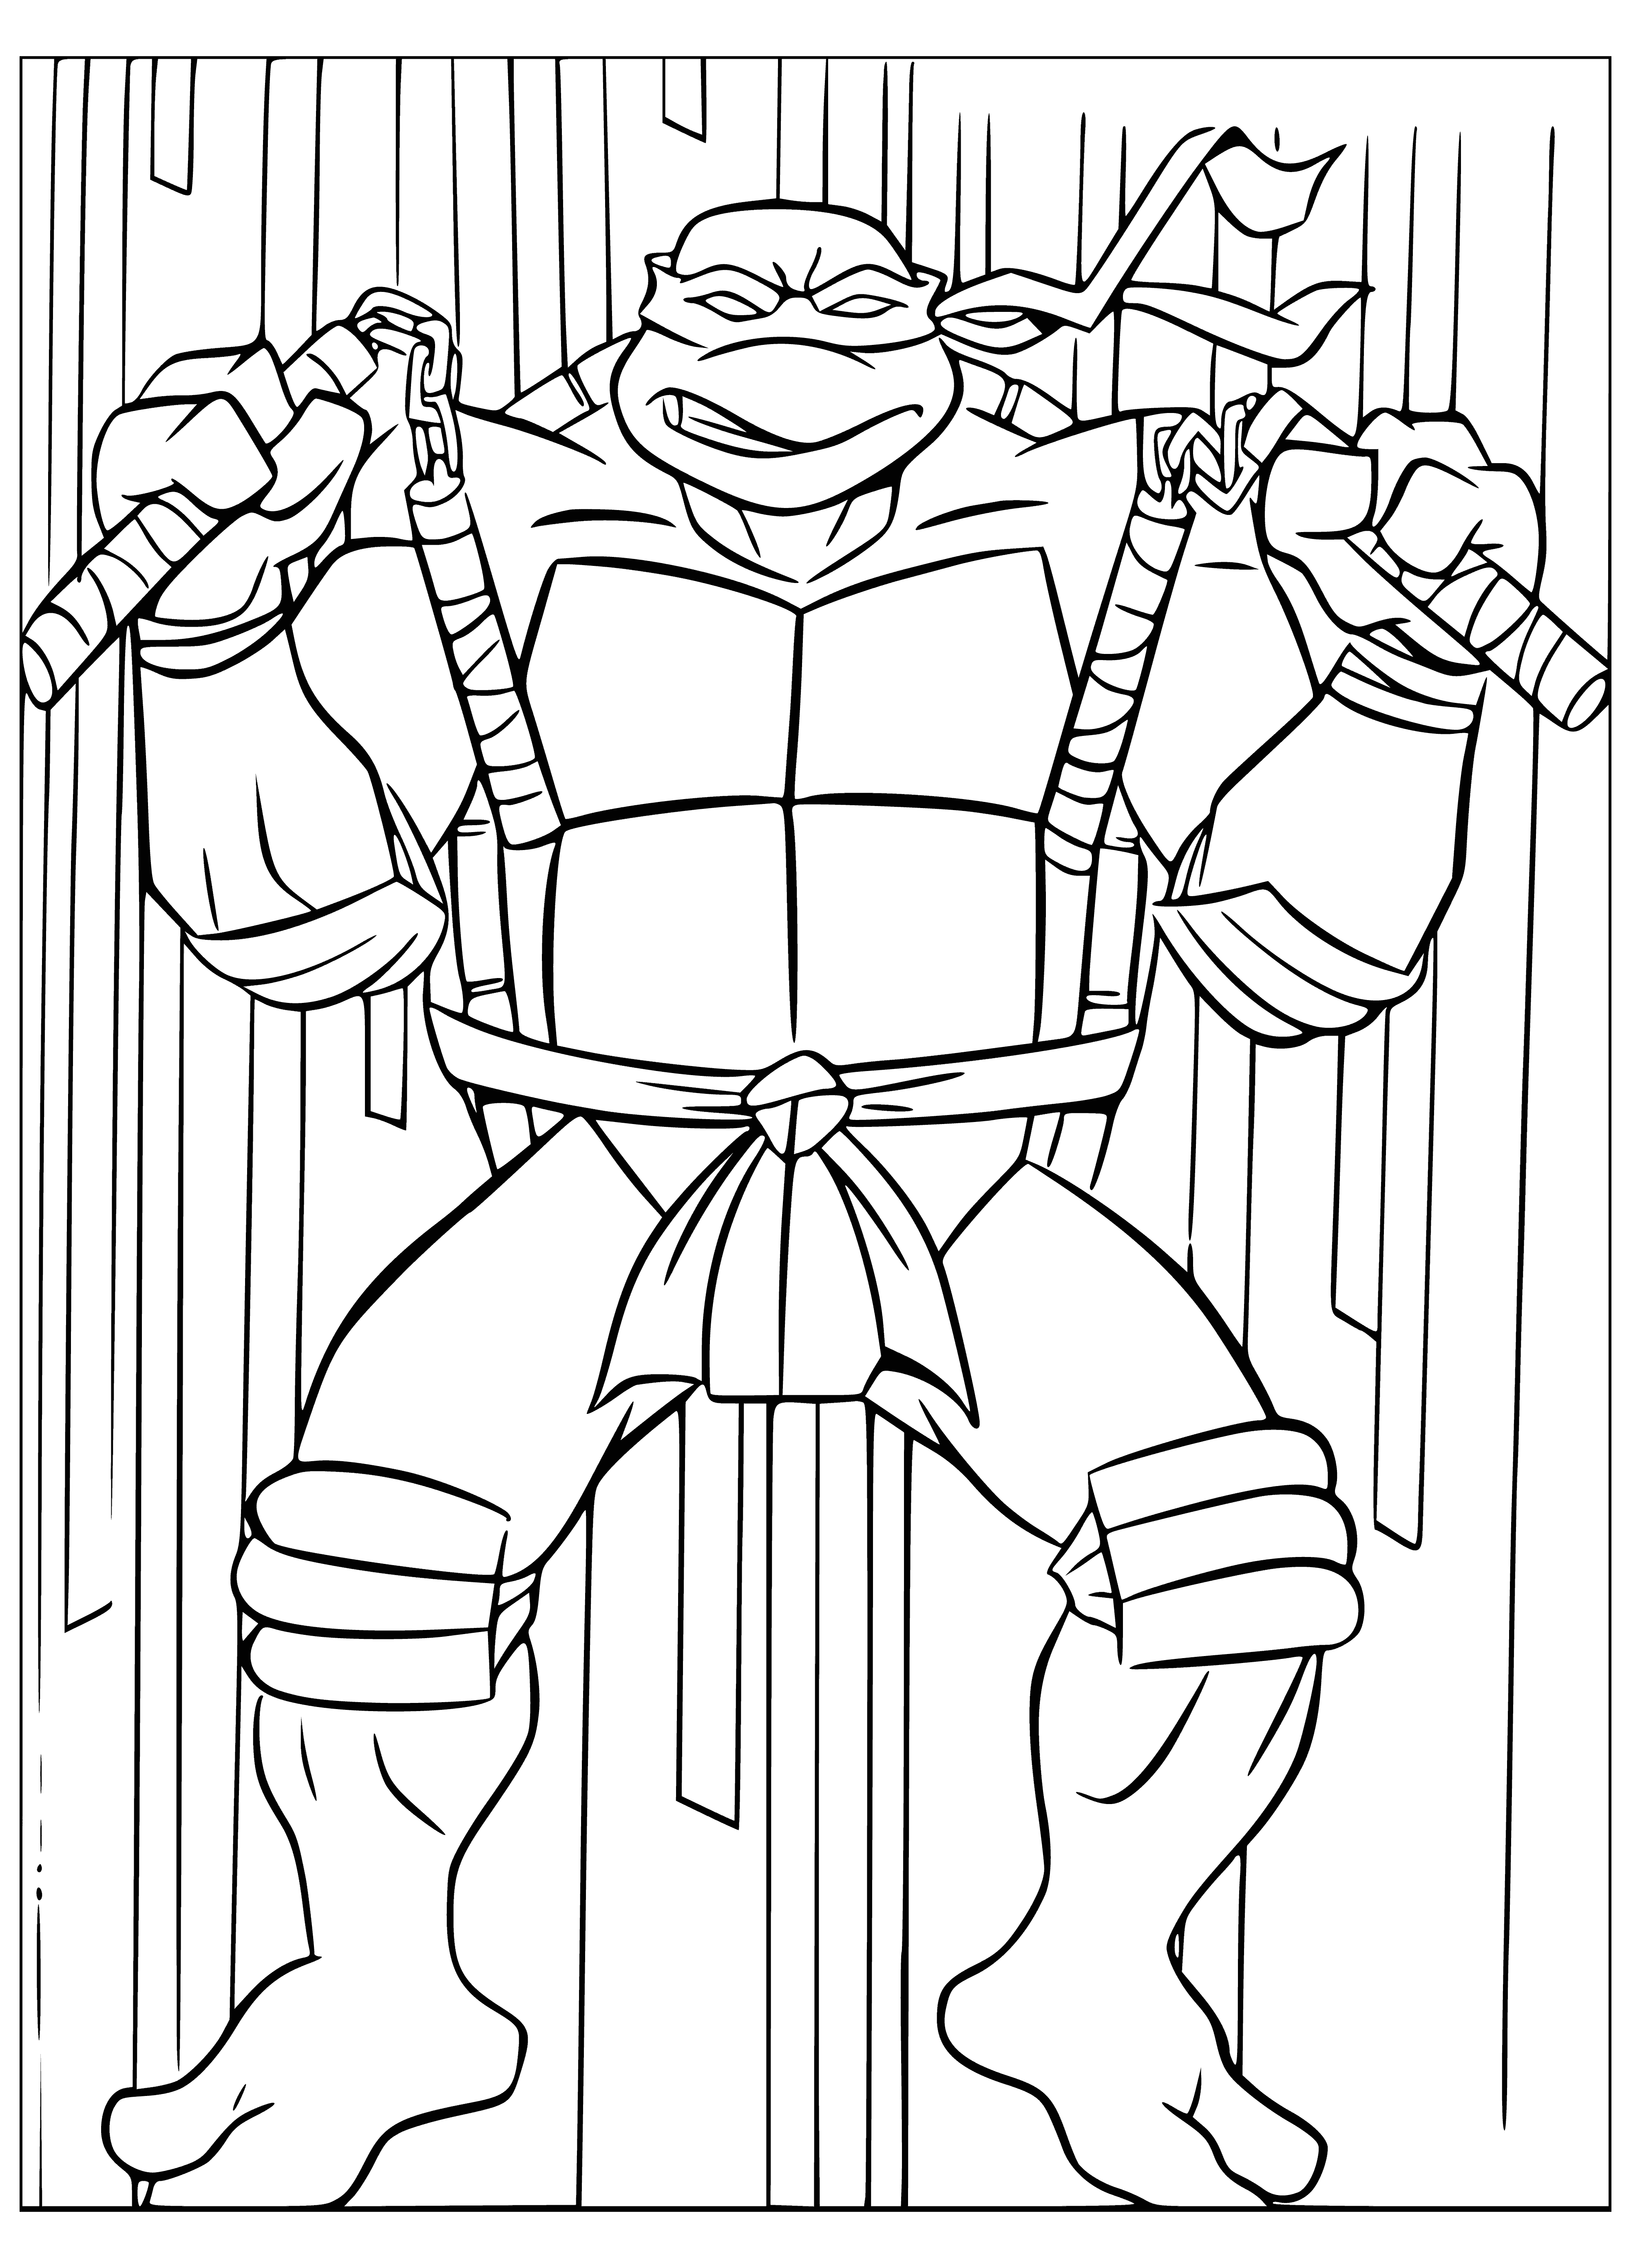 coloring page: Four Ninja Turtles, incl. Michelangelo - orange mask, shell, two swords, always joking, loves pizza.